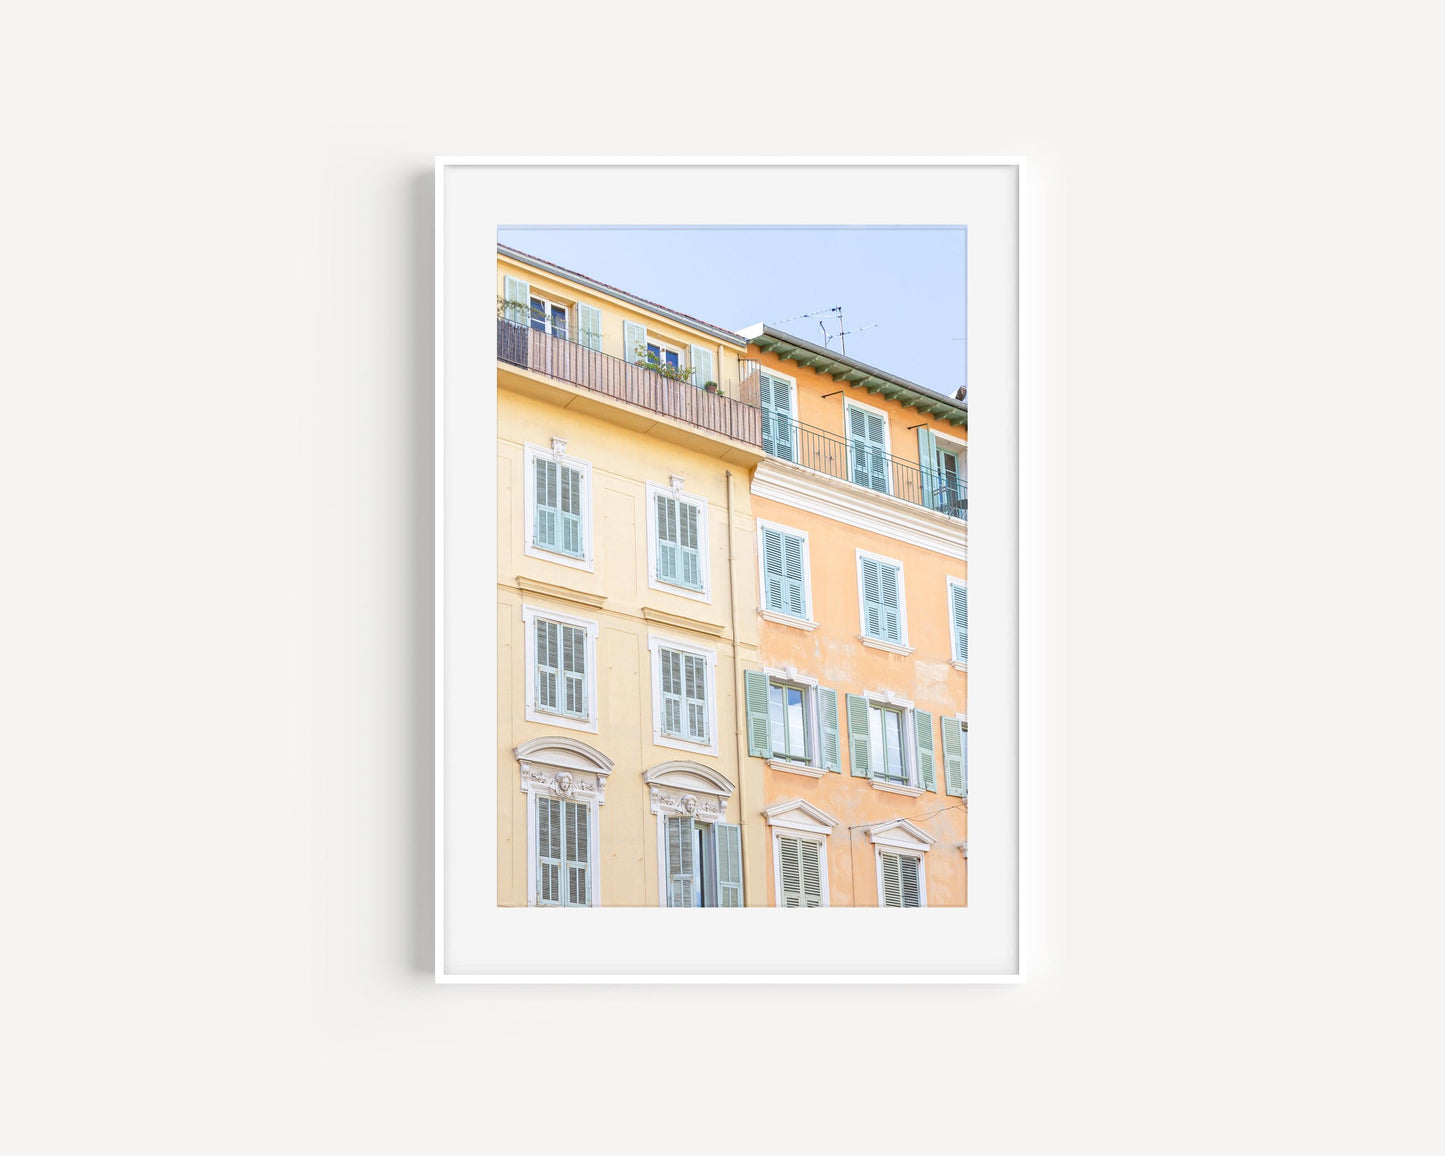 Colorful Nice Architecture II | French Riviera Print - Departures Print Shop